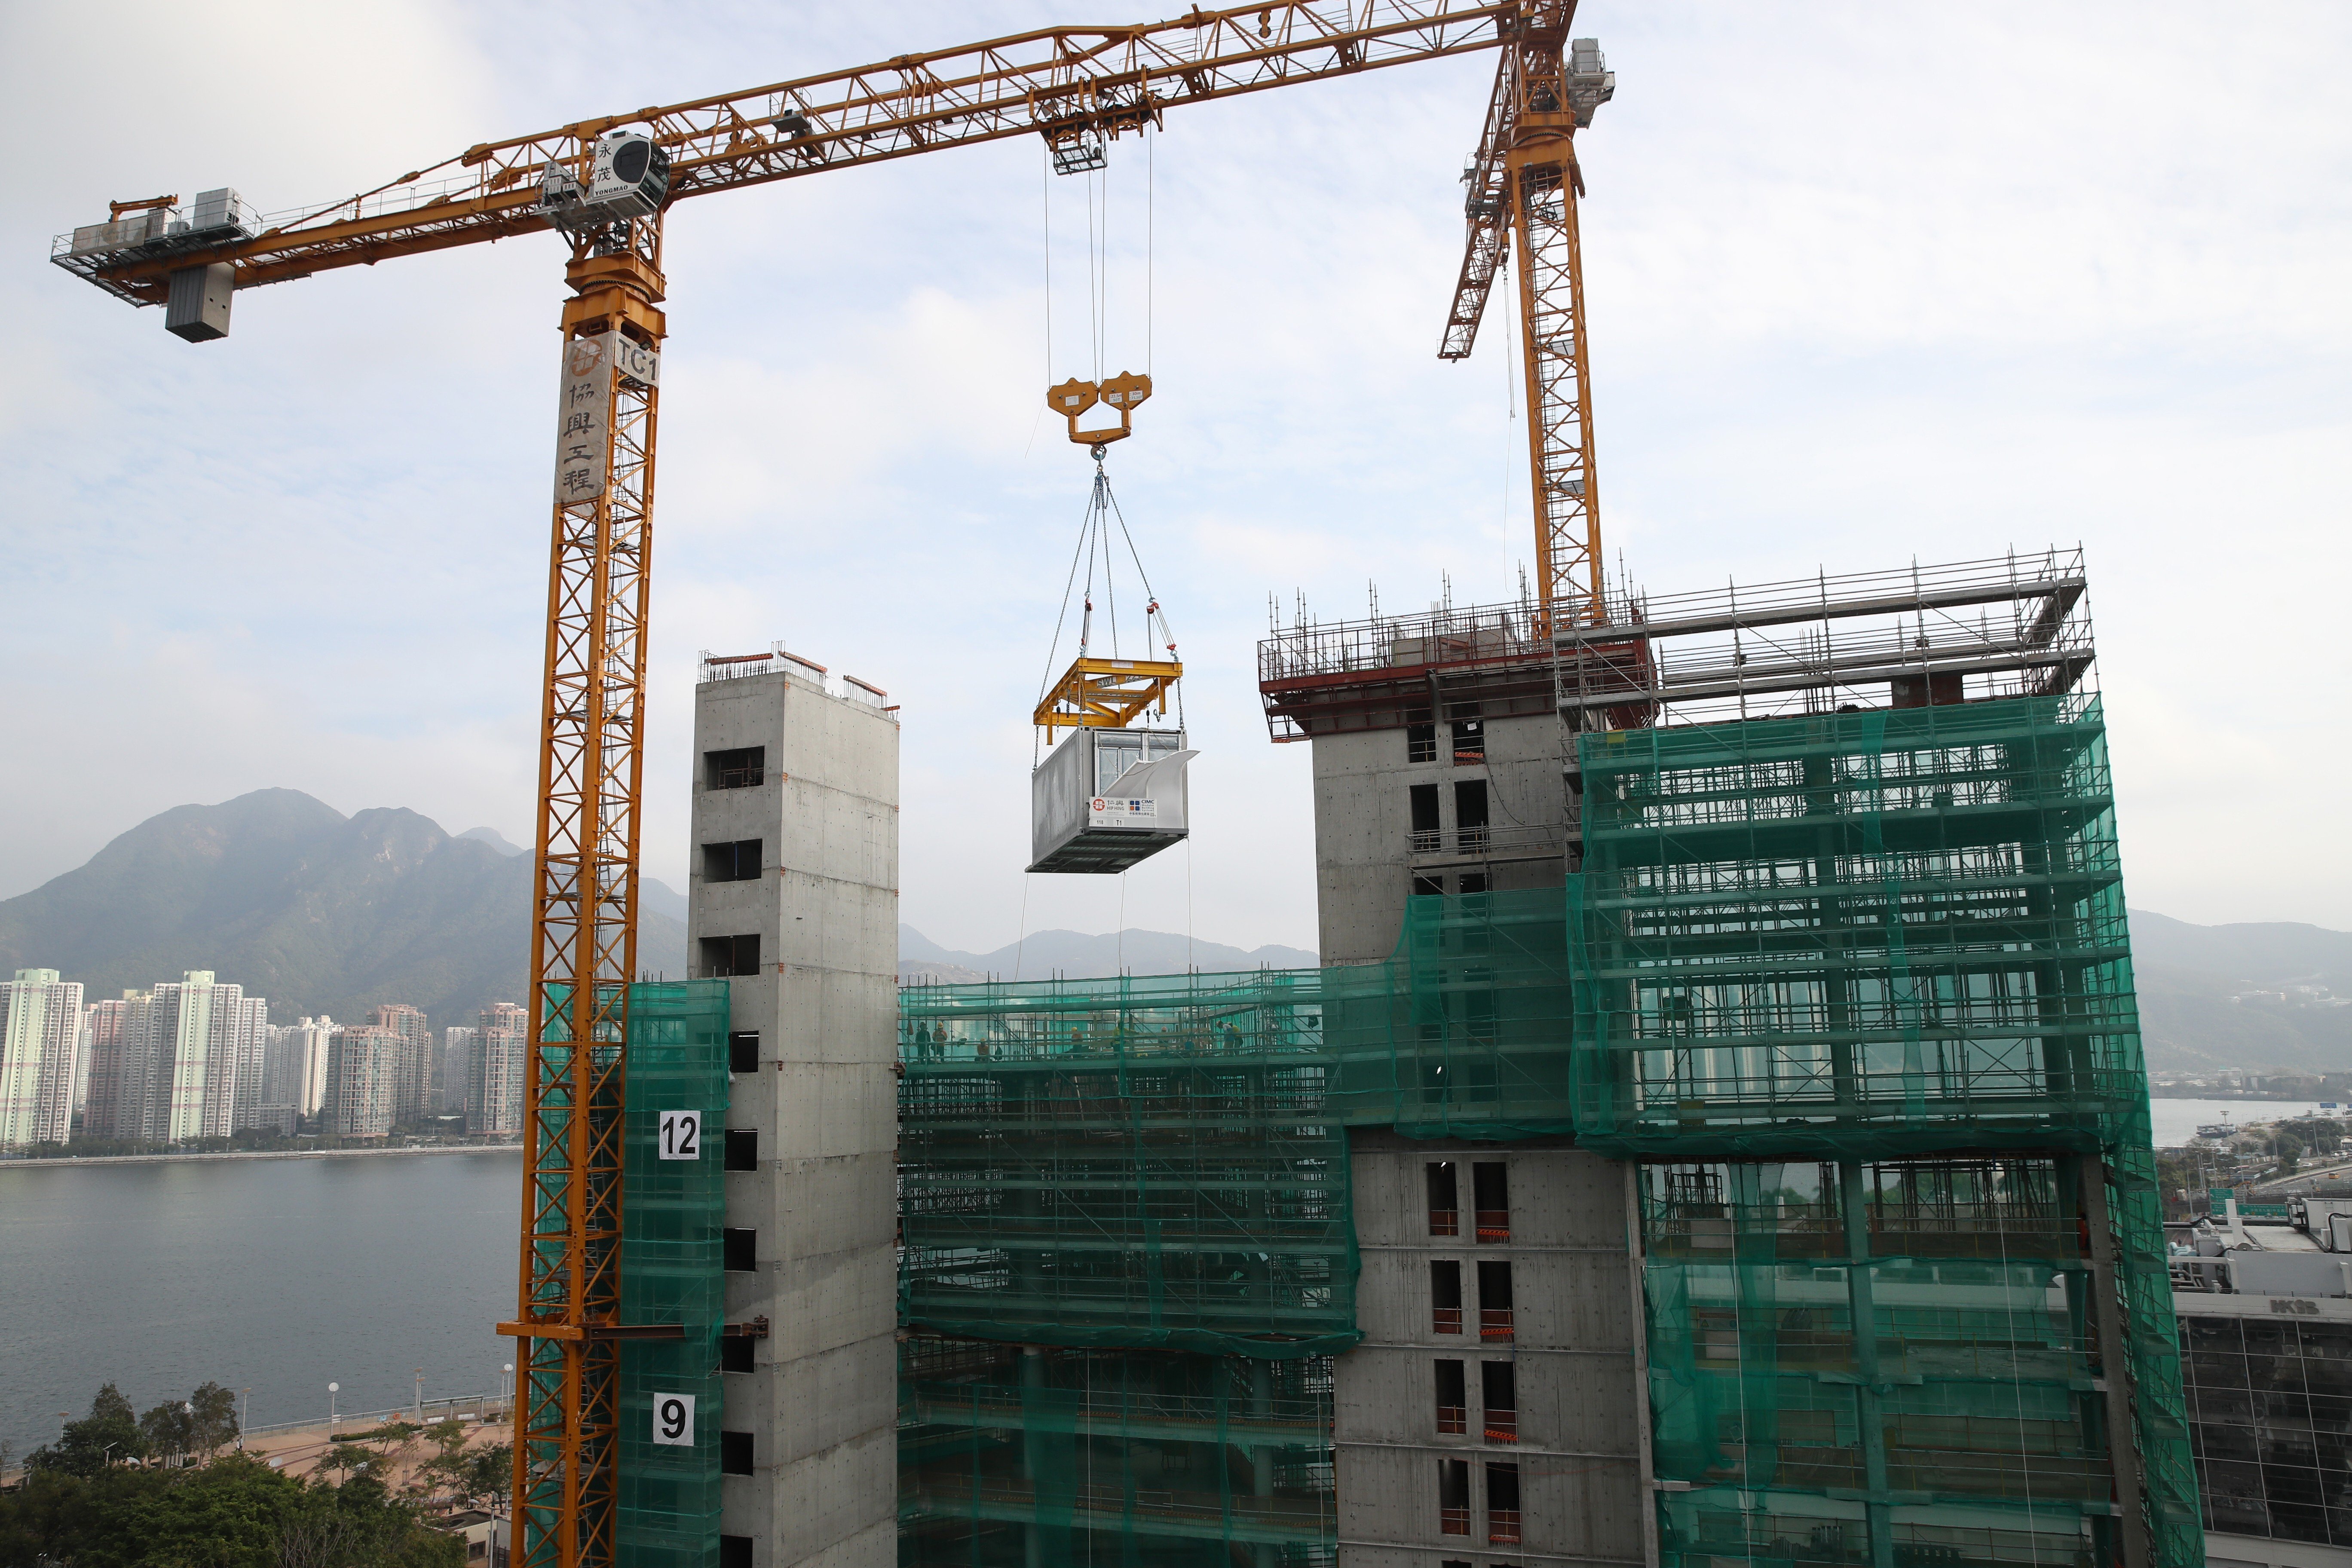 The Science Park in Sha Tin was built using modular integrated construction technology. Photo: Winson Wong